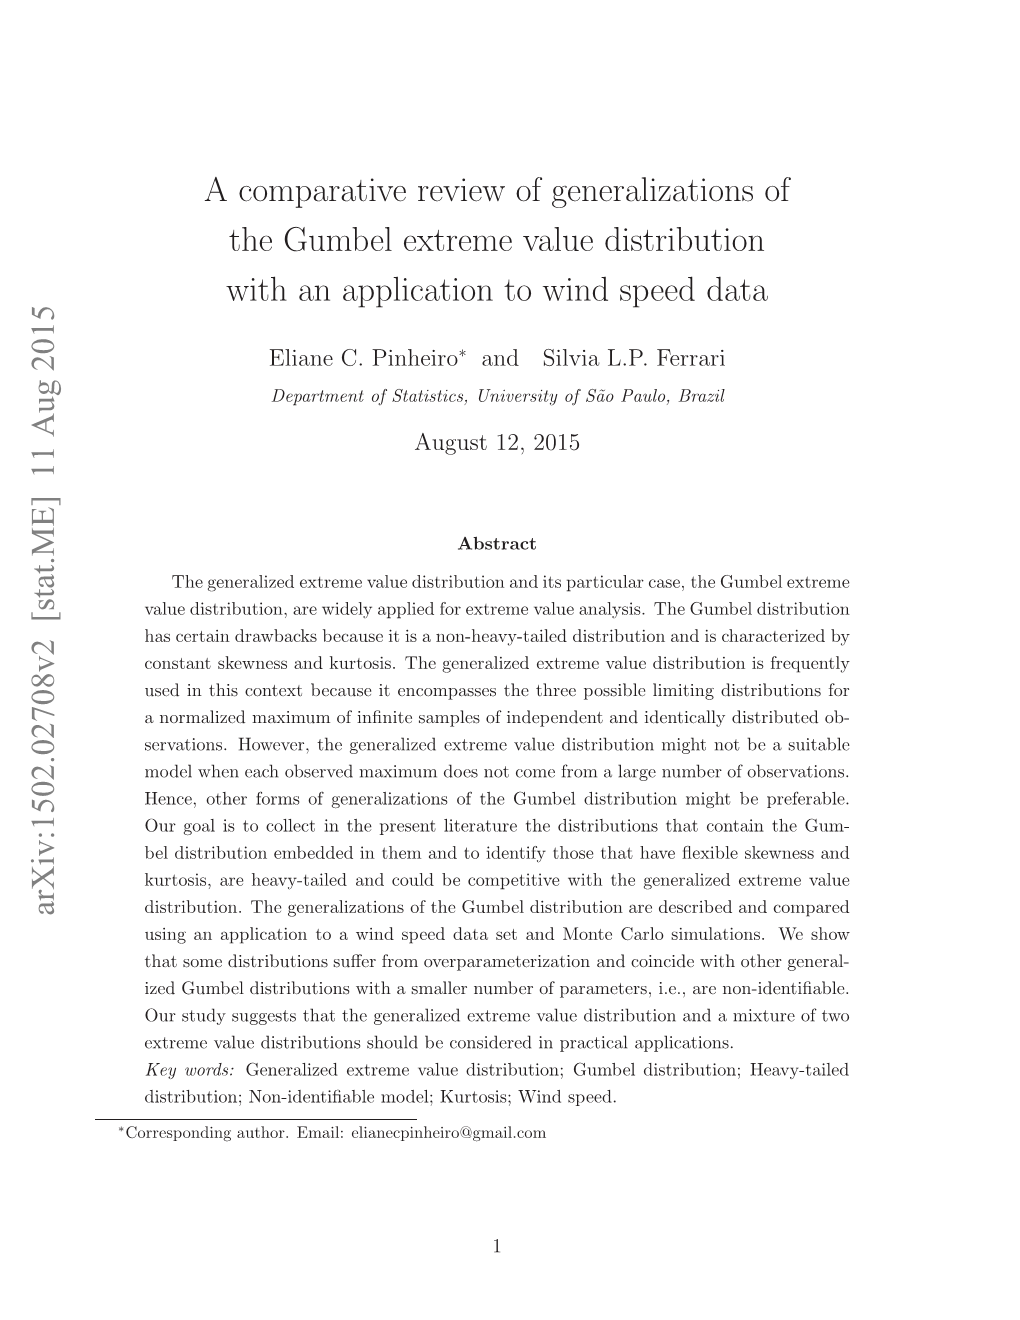 11 Aug 2015 a Comparative Review of Generalizations of the Gumbel